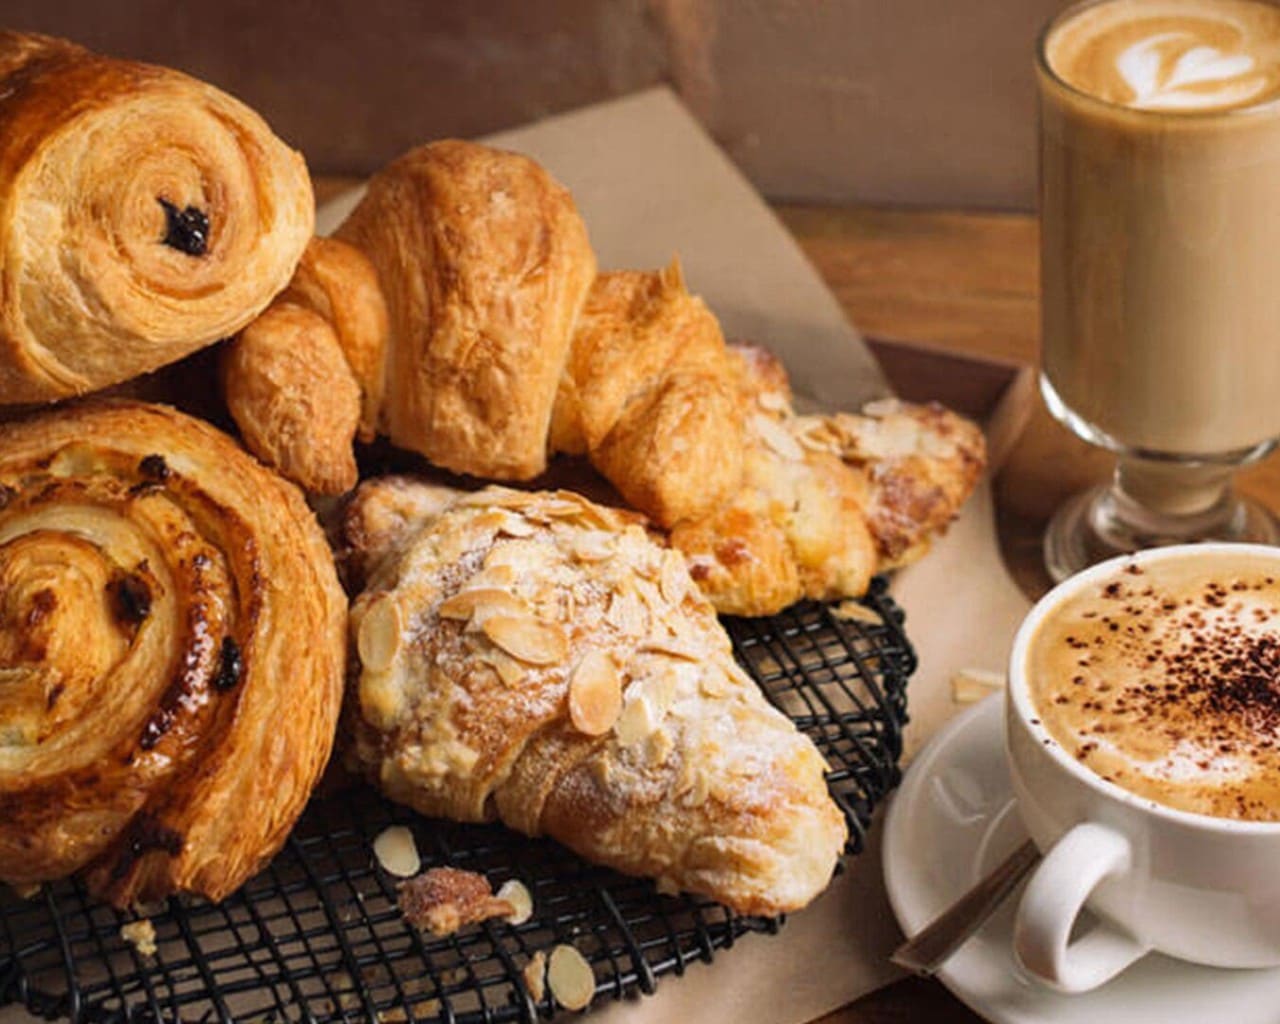 Freshly baked pastries from Da Paolo, an Italian restaurant in Singapore